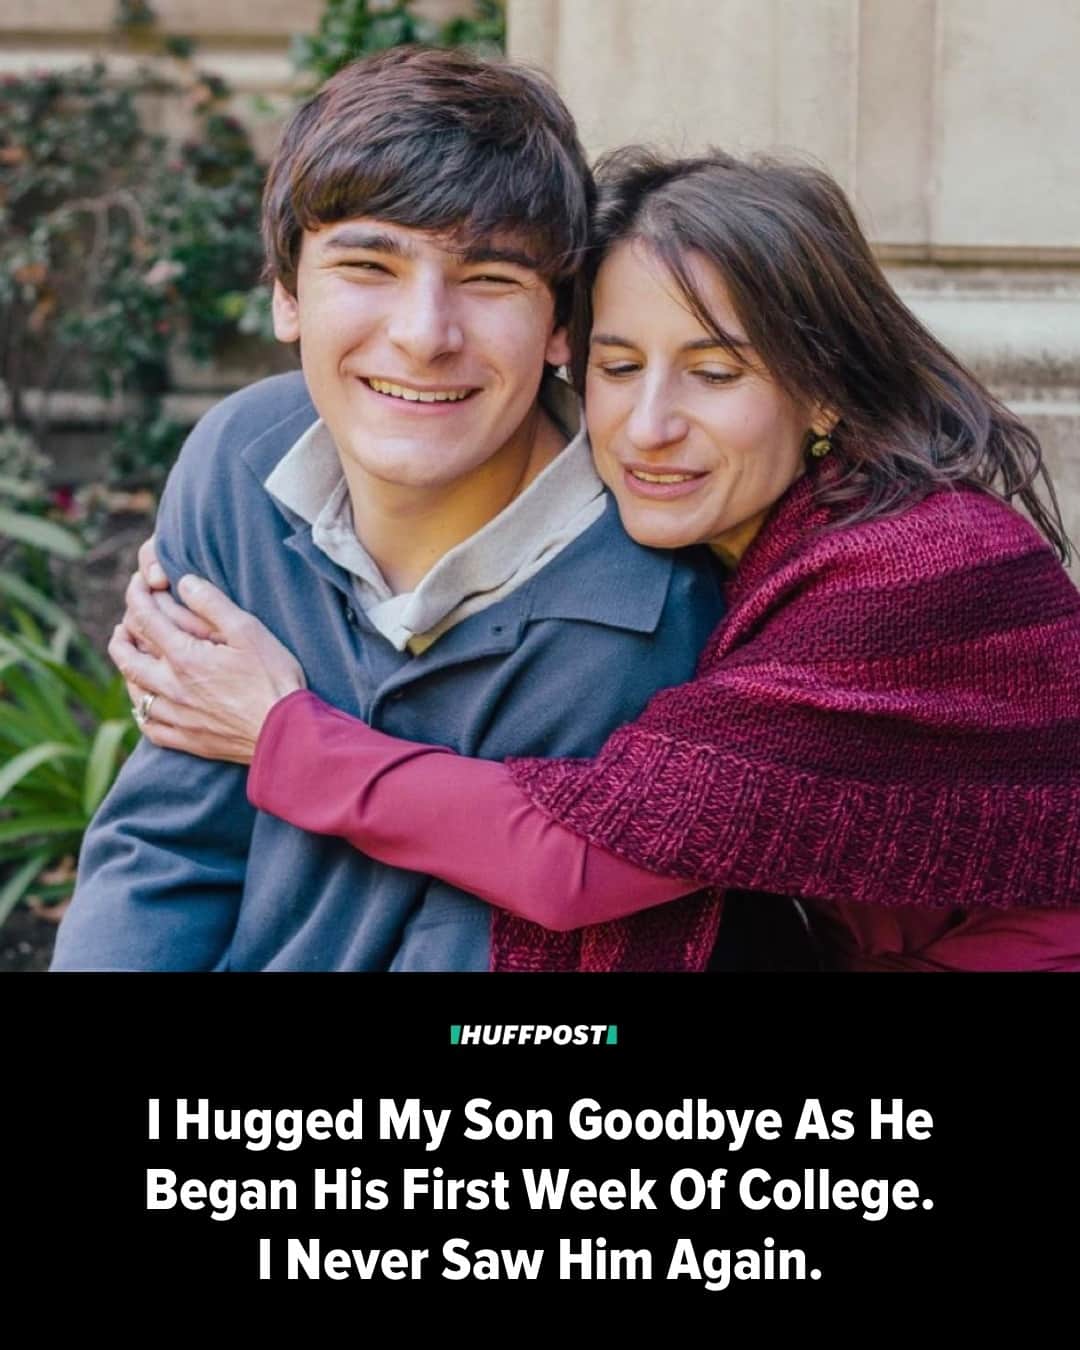 Huffington Postのインスタグラム：「"In the summer of 2022, my husband Chuck and I sent Henry, our 18-year-old son, off to college," writes HuffPost guest writer Elizabeth Kopple. "He’d overcome so many challenges to get there: attention-deficit/hyperactivity disorder, anxiety, and difficulty connecting with other kids. As he matured, he gained confidence by participating in cross-country running, drama and debate. He developed a rapport with his peers by listening more and talking less. When he flew to college, he left behind friends from high school, summer jobs and youth groups. He was ready academically and had even earned a merit scholarship."⁠ ⁠ "On Friday, when it was time for me to leave, I placed my hands around Henry’s middle, pressed my right cheek to his chest, closed my eyes and squeezed," Kopple continues. "At that moment, I was embracing every version of my son: chunky baby, curious toddler, zany seventh grader in braces, hungry teenager, all the rest I knew and had known. After one final hug — Henry’s signature move — I left for the airport."⁠ ⁠ "The following Monday night, around midnight, Chuck and I were awakened by two policemen who told us Henry had been killed."⁠ ⁠ "How is this possible? I helped Henry unpack in his dorm room," Kopple writes. "We put away his jeans, mountains of socks, shower shoes and toiletries, a book he was excited to read called “The Nordic Theory of Everything,” Kind bars, and cups of Dr. McDougall’s Black Bean & Lime instant soup."⁠ ⁠ "In an instant, every expectation for our family and our future was obliterated."⁠ ⁠ Read more at our link in bio. // 📷 Courtesy of Elizabeth Kopple」